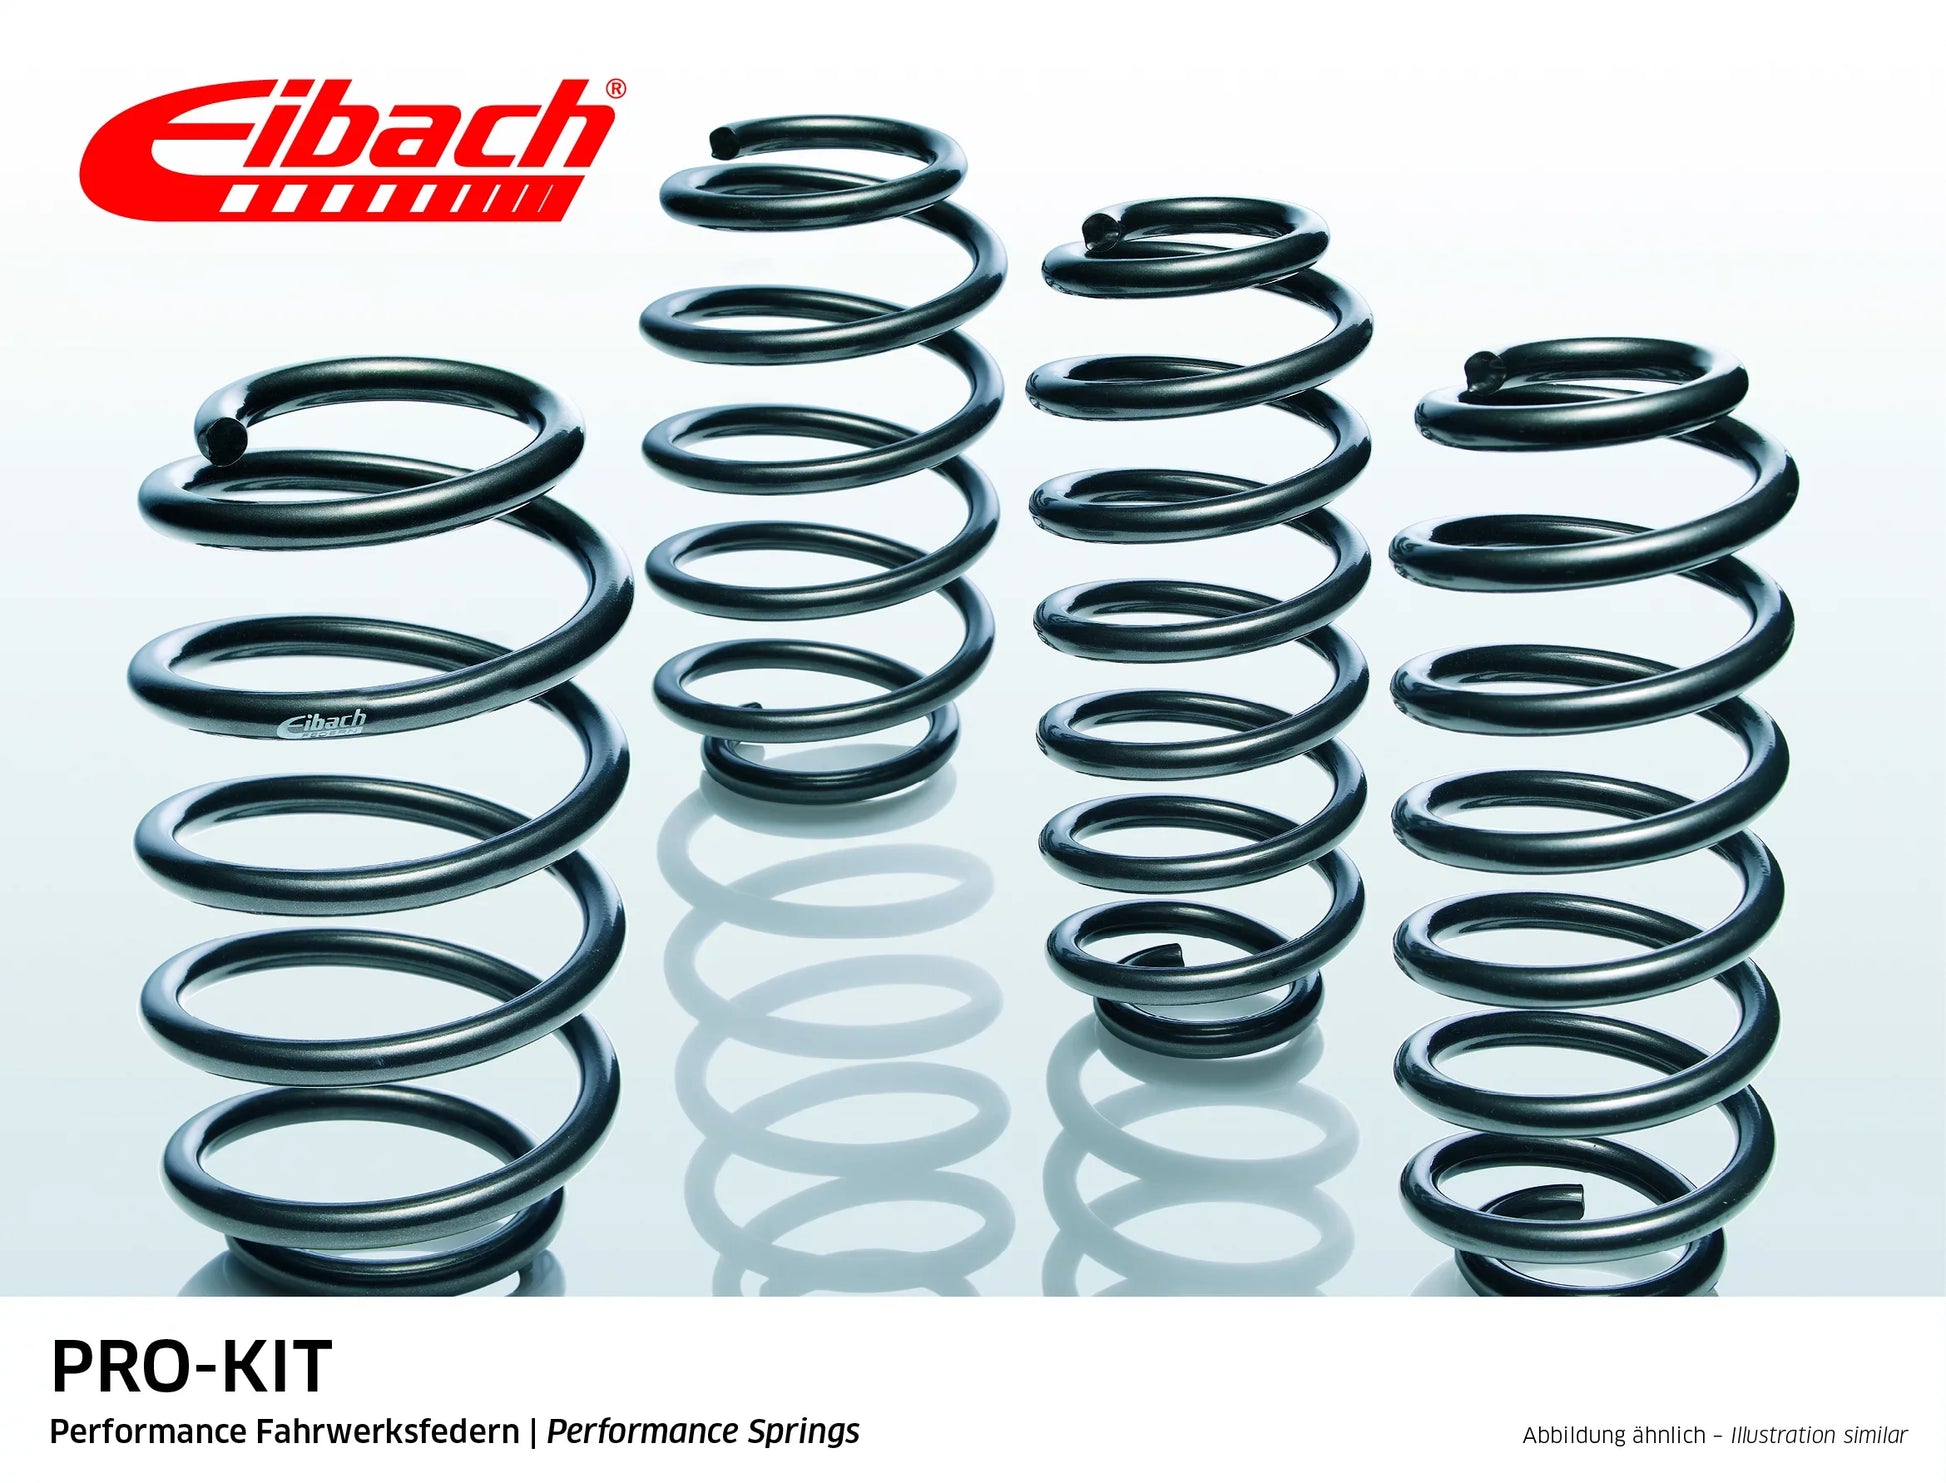 Eibach Pro-Kit Lowering Springs (E10-82-016-04-22) at £276.05